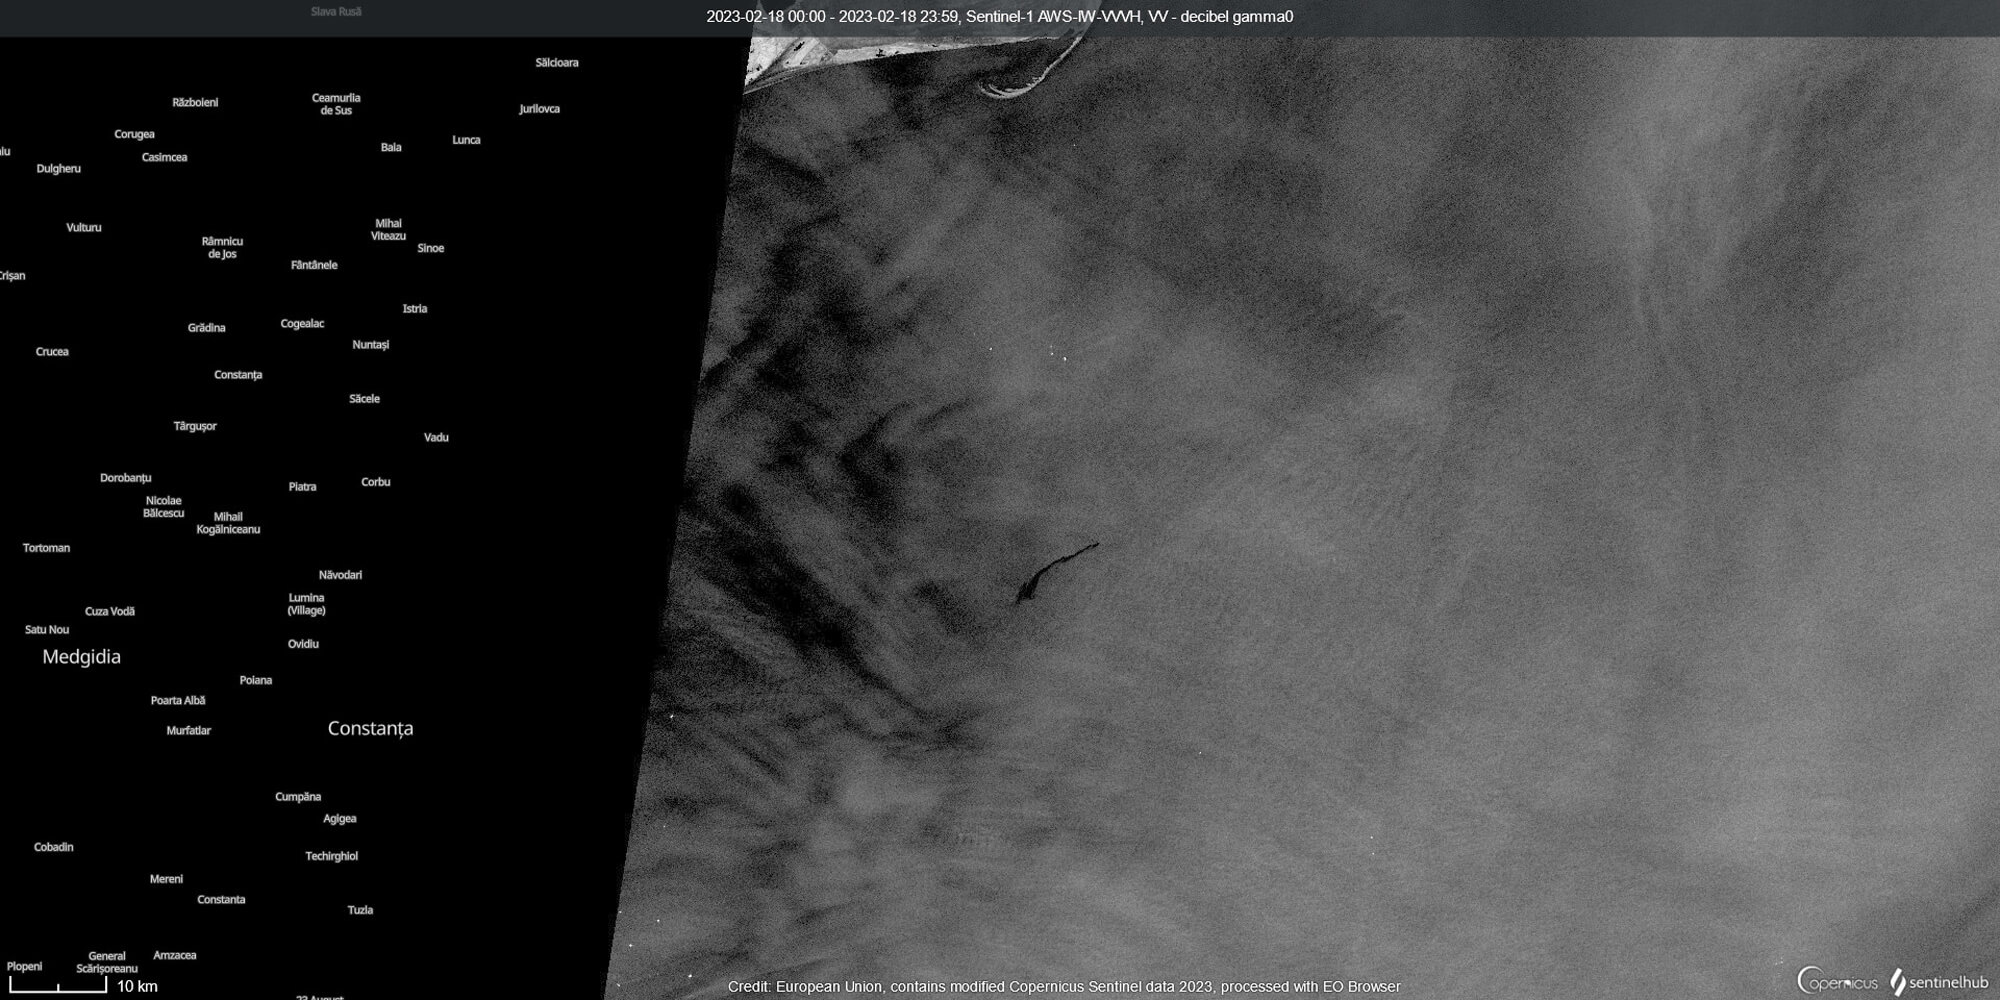 Citizen Science Workshop: Toolbox for Civil Investigation – Focus on Environmental Crimes: Oil slick in the Black Sea off Constanta, Romania, on February 18, imaged by radar satellite Sentinel-1